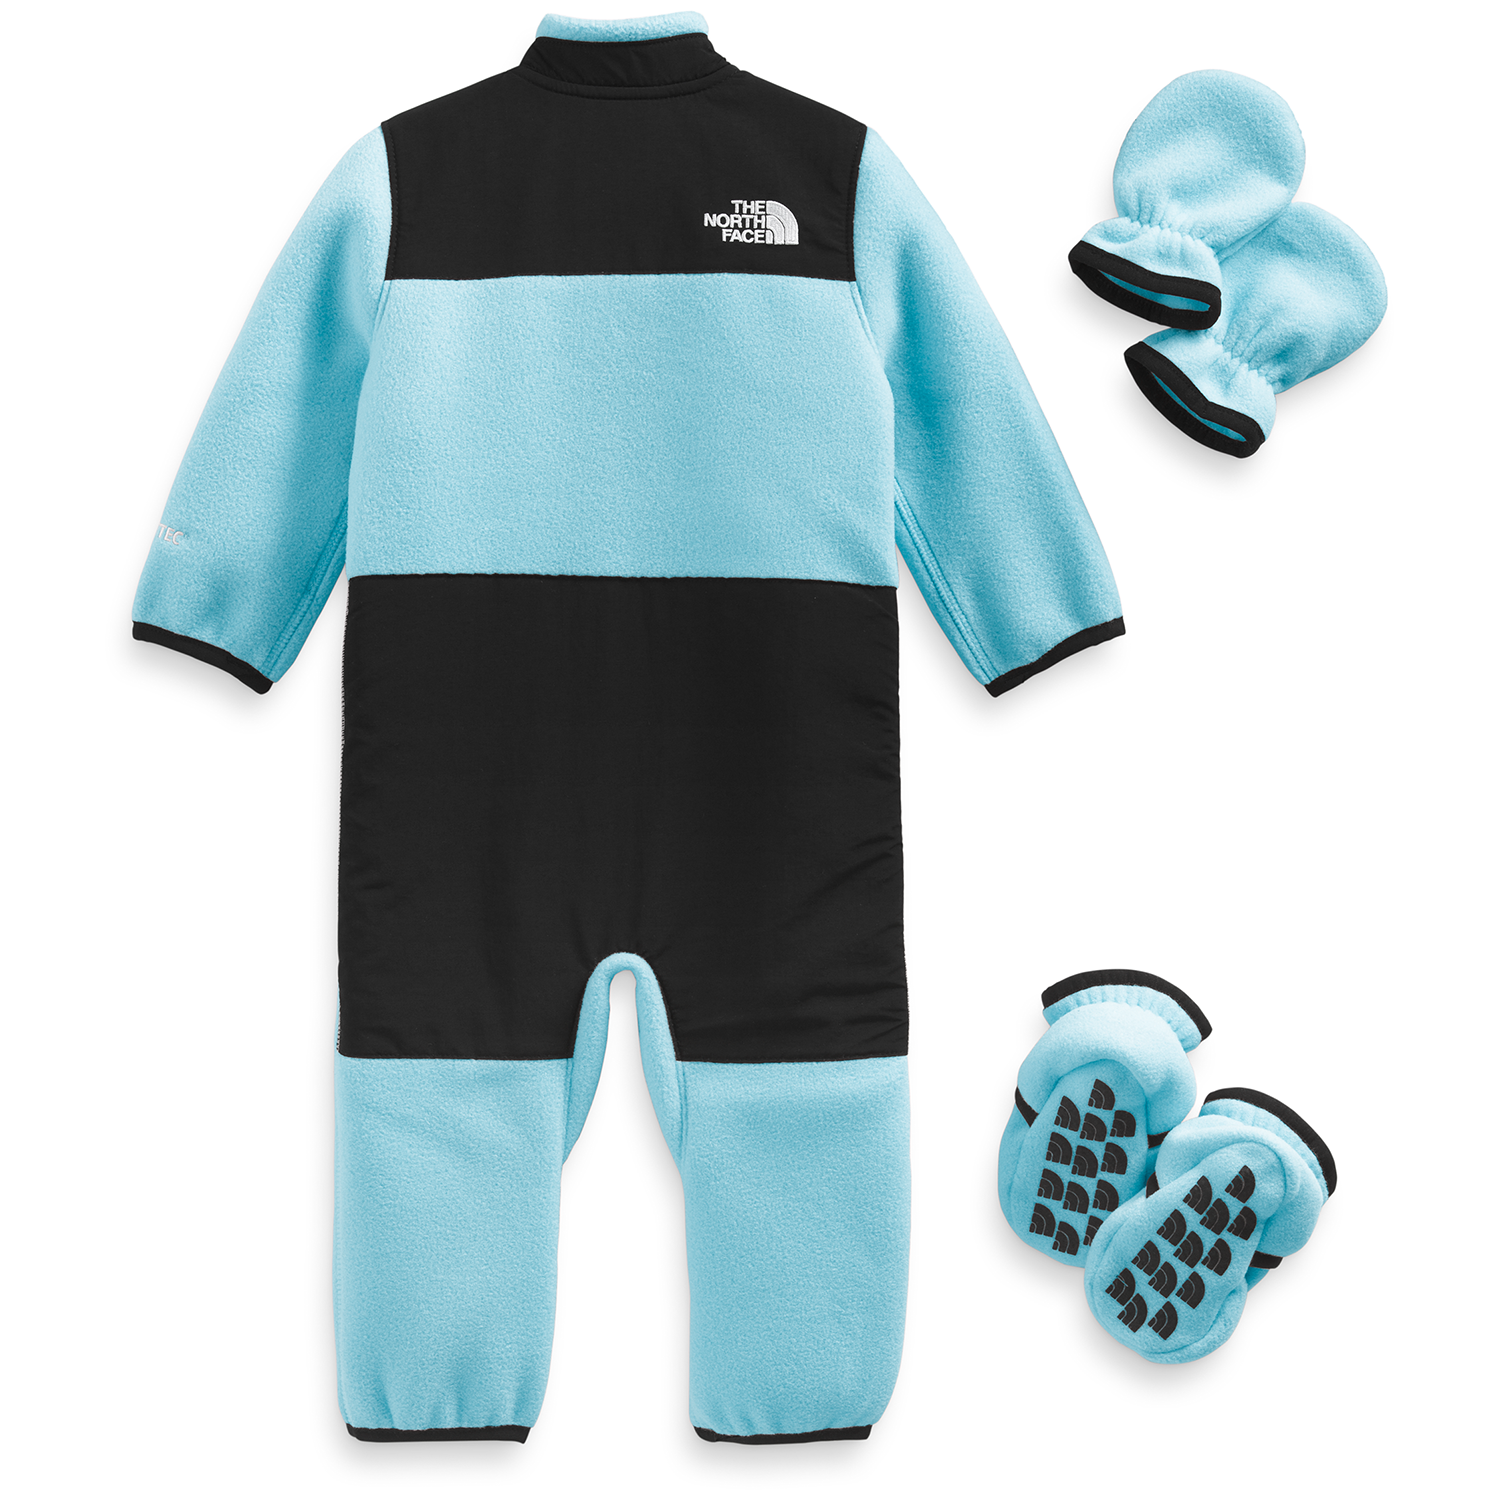 The North Face Denali Onepiece Set - Infants' | evo